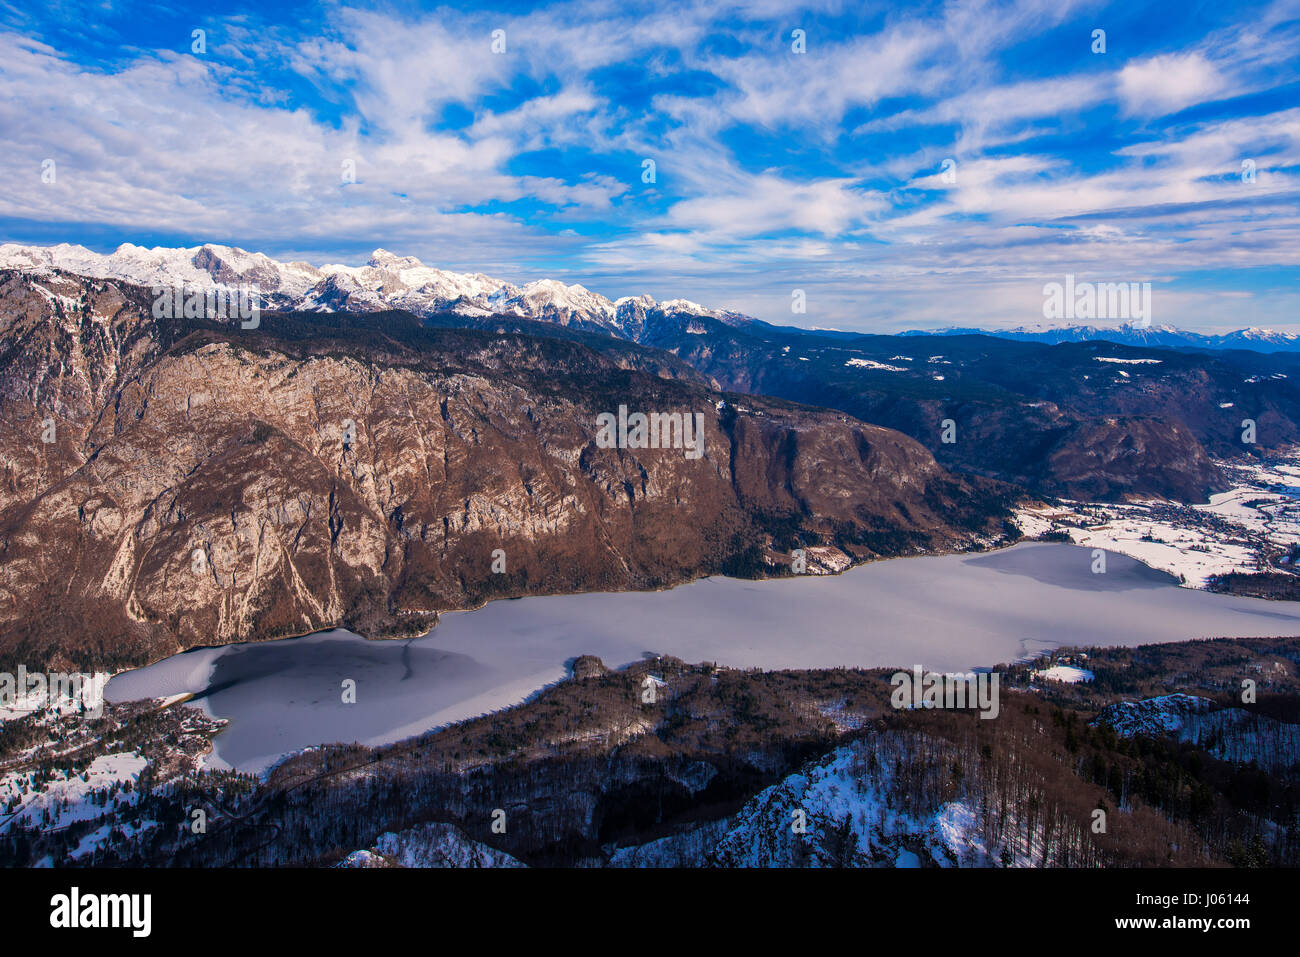 Triglav mountain above Bohinj lake valley in winter time, beautiful landscape of a part of Julian Alps mountain range and national park in Slovenia Eu Stock Photo